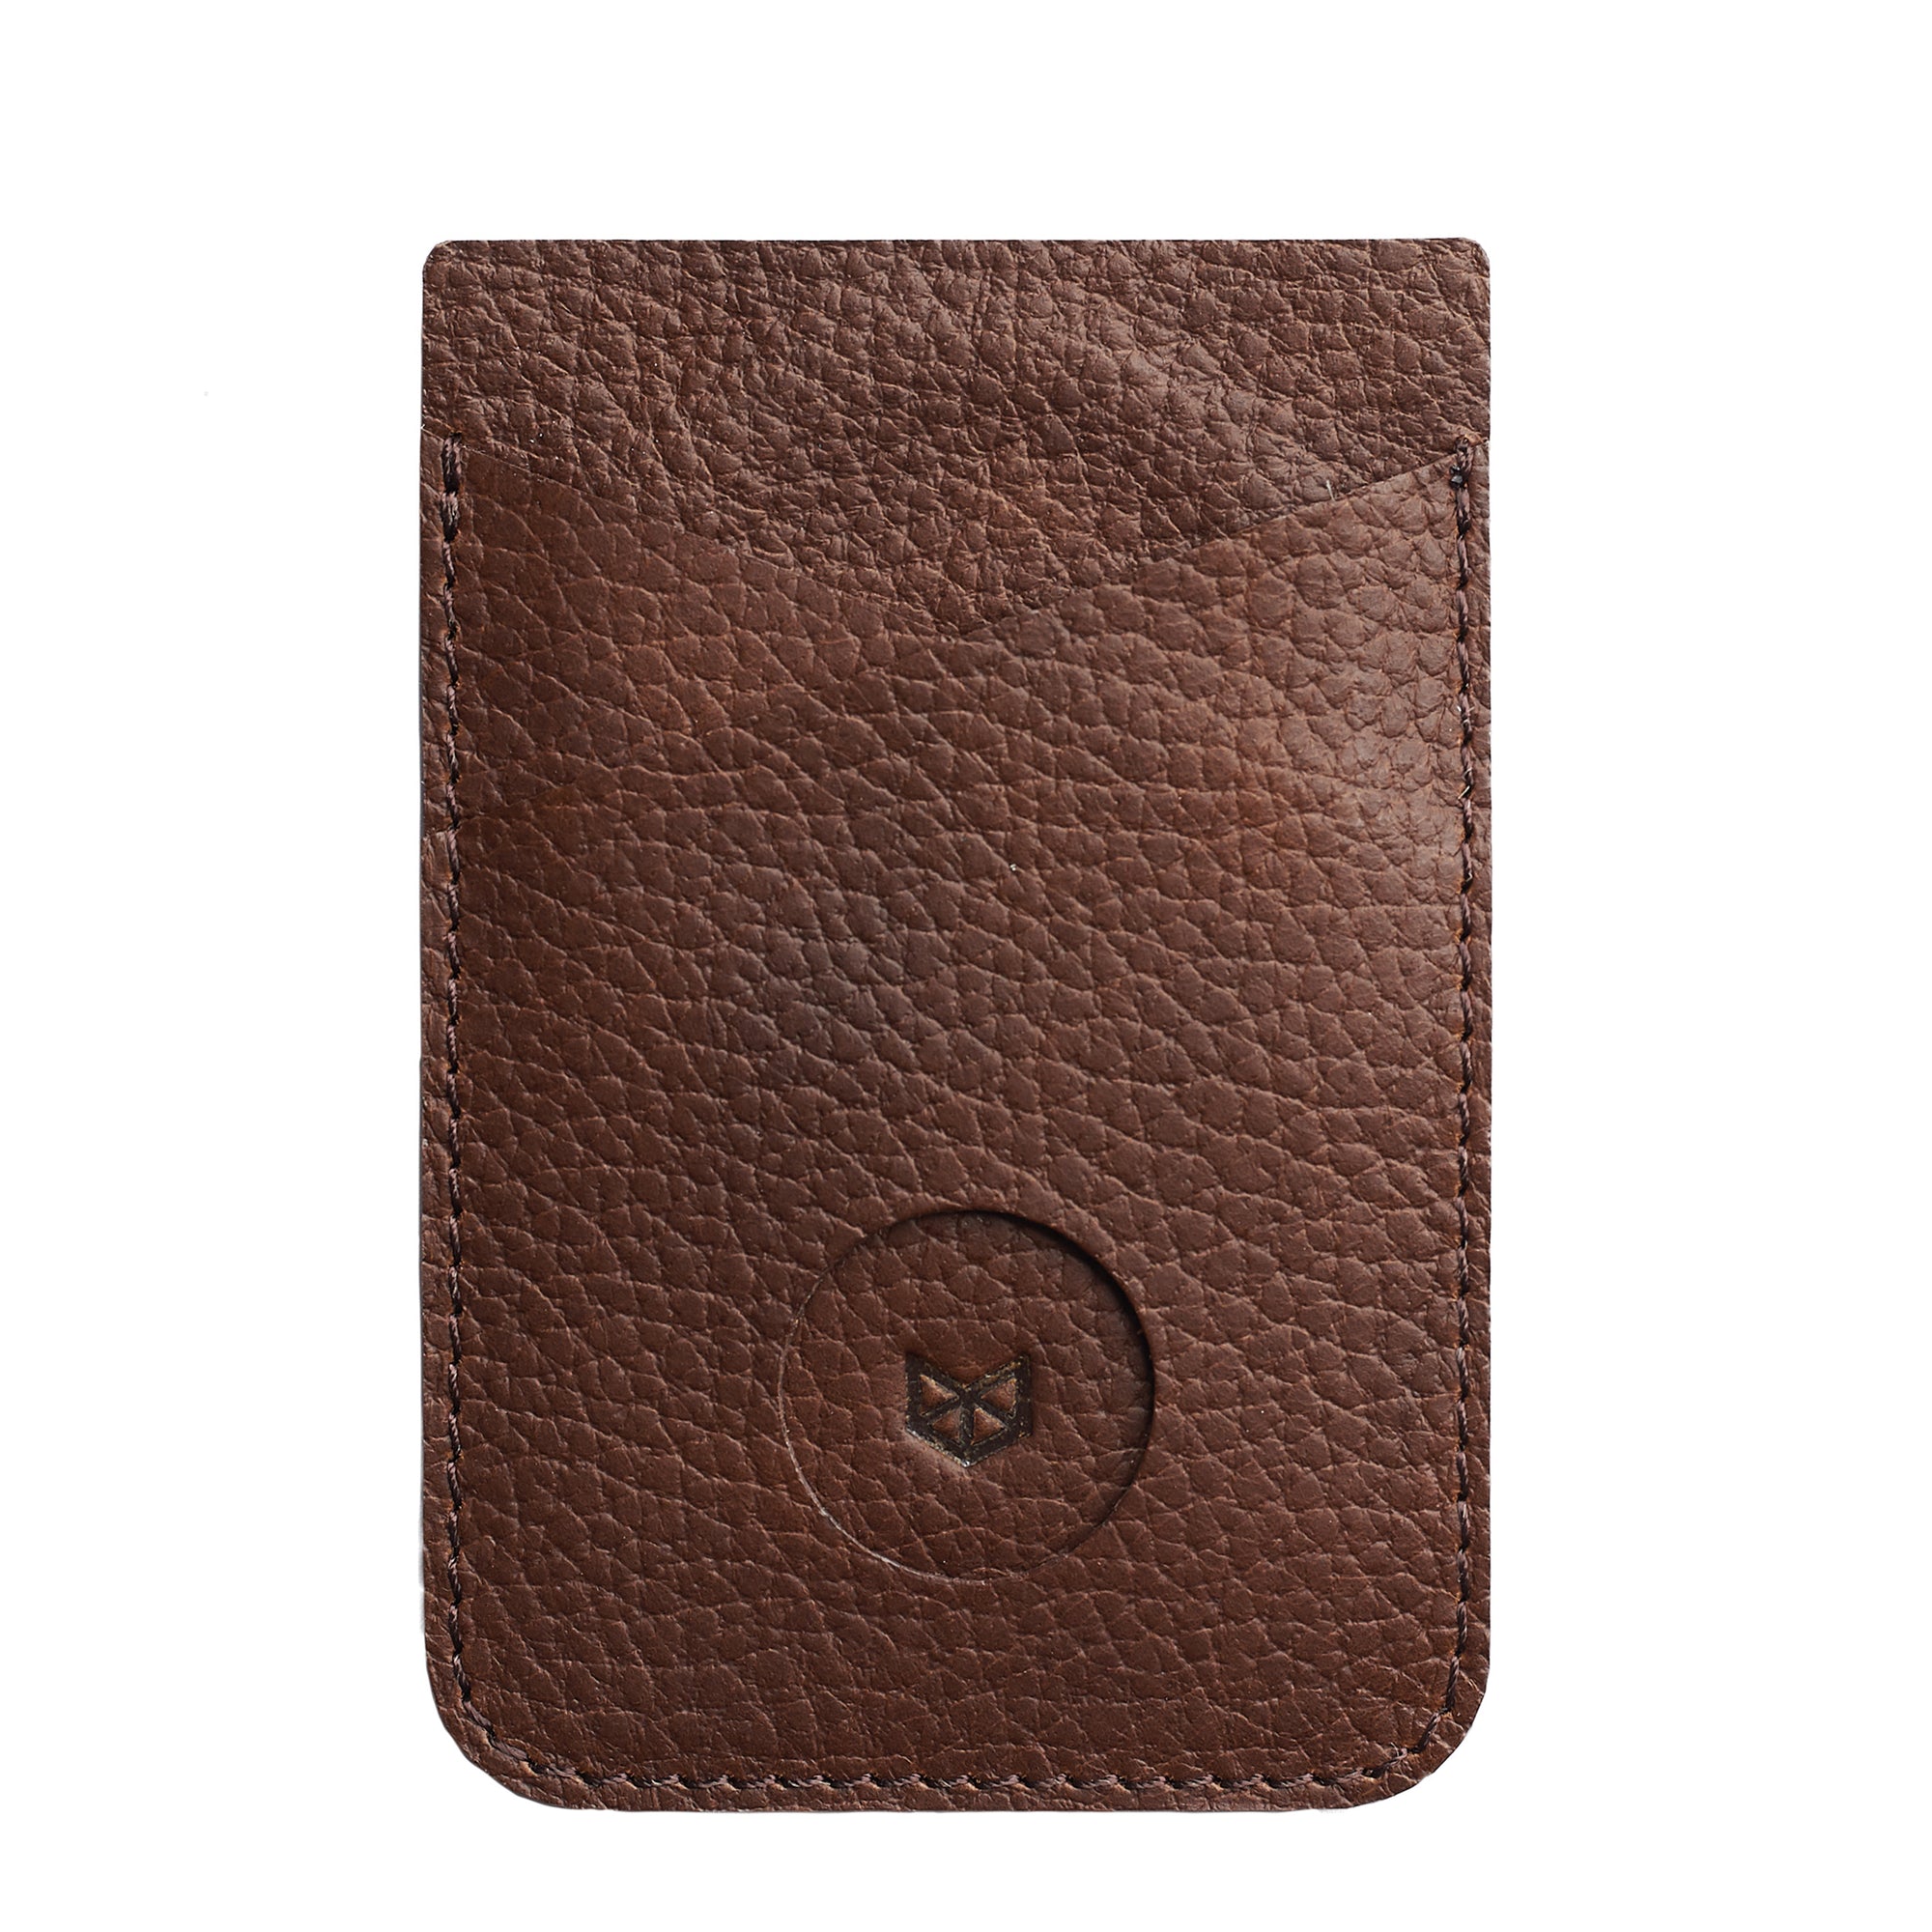 Cover. Small Gear Travel Pouch 2 Brown by Capra Leather